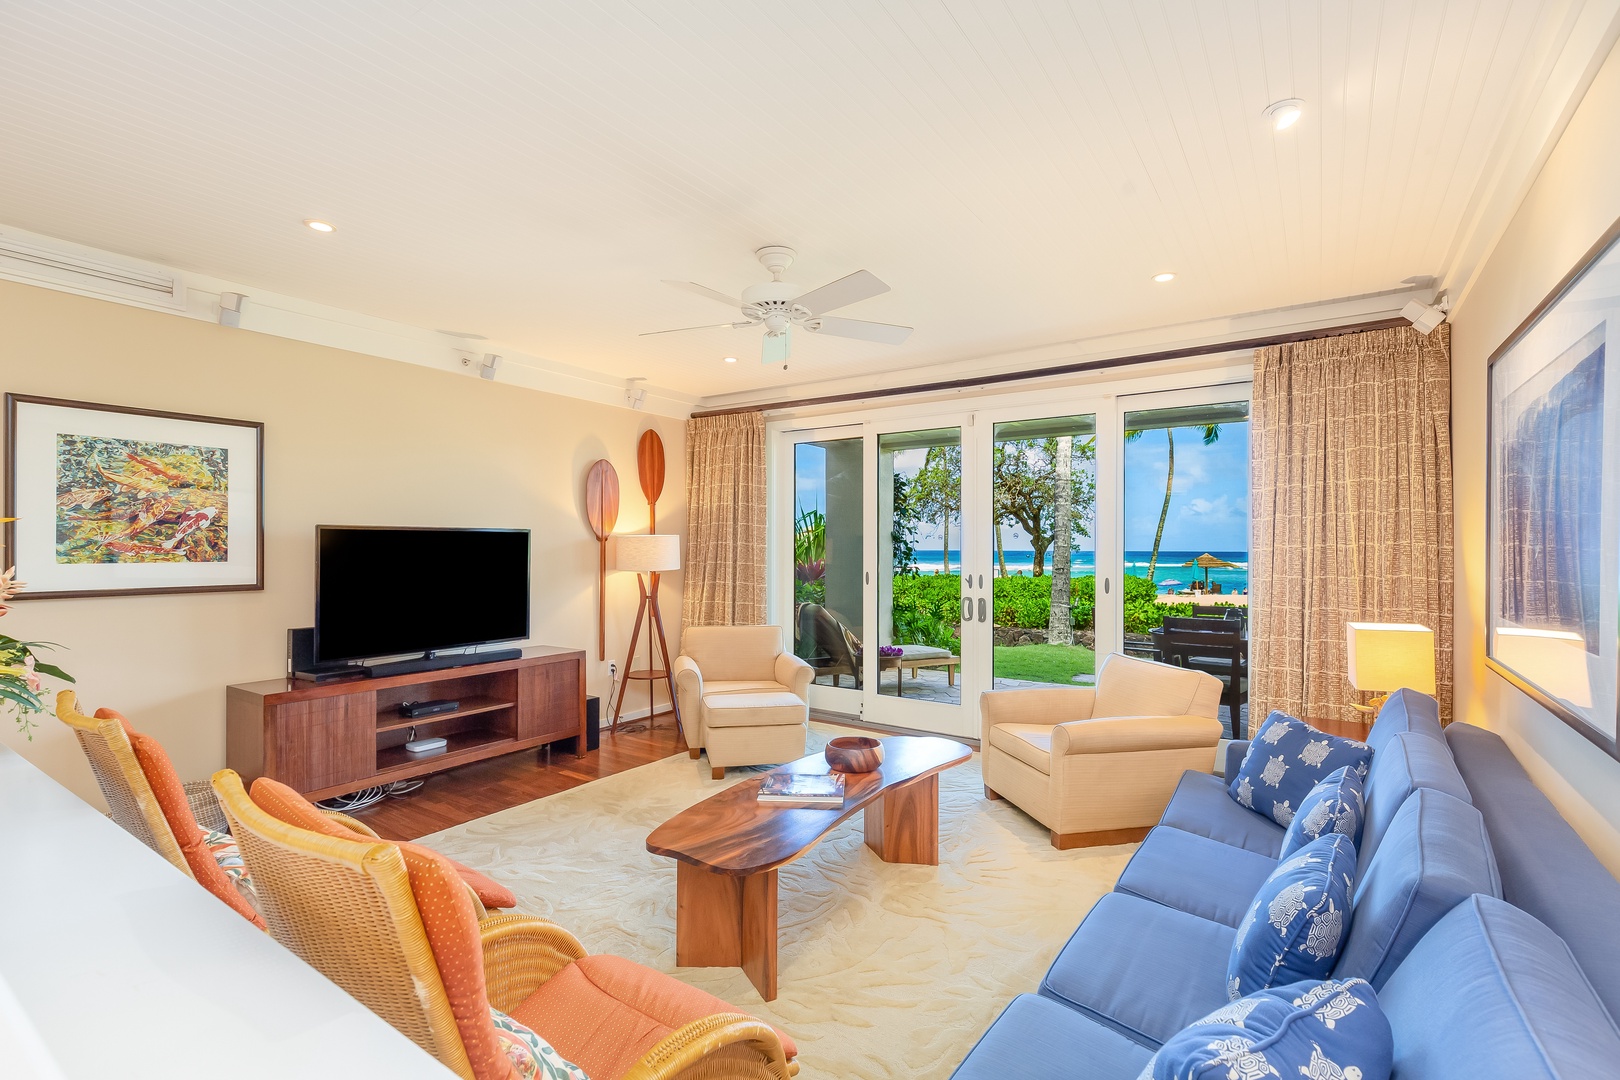 Kahuku Vacation Rentals, OFB Turtle Bay Villas 101 - Living room with a view